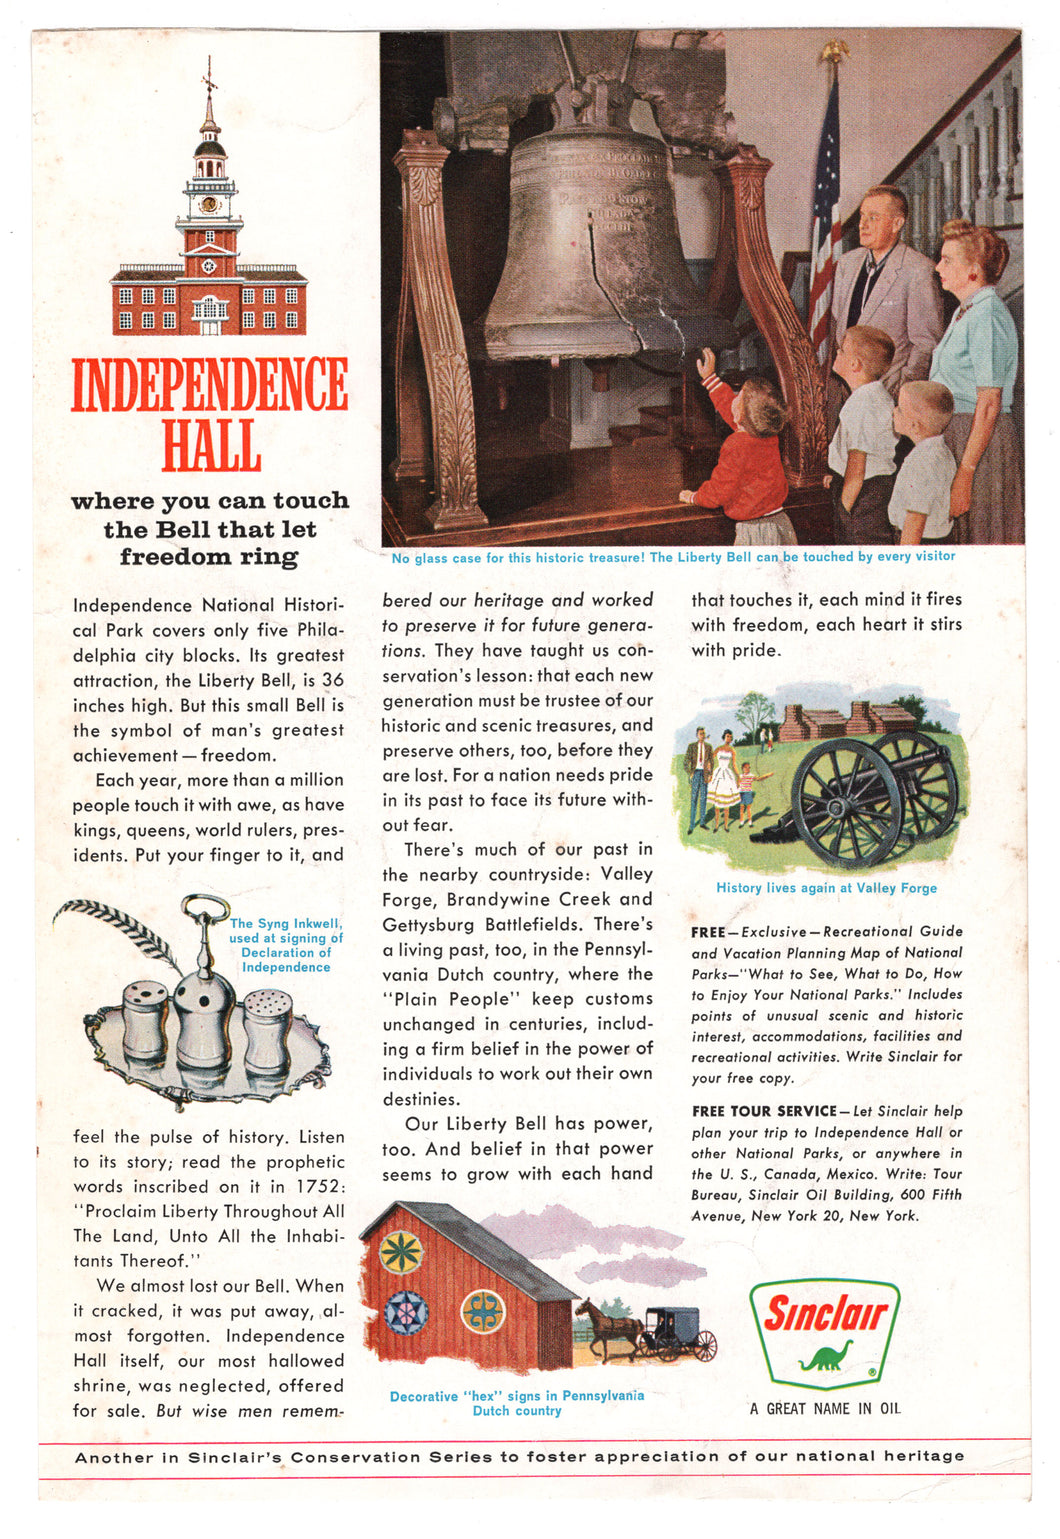 Sinclair Oil - Vintage Ad - (Independence Hall - Liberty Bell) # 491 - 1960's